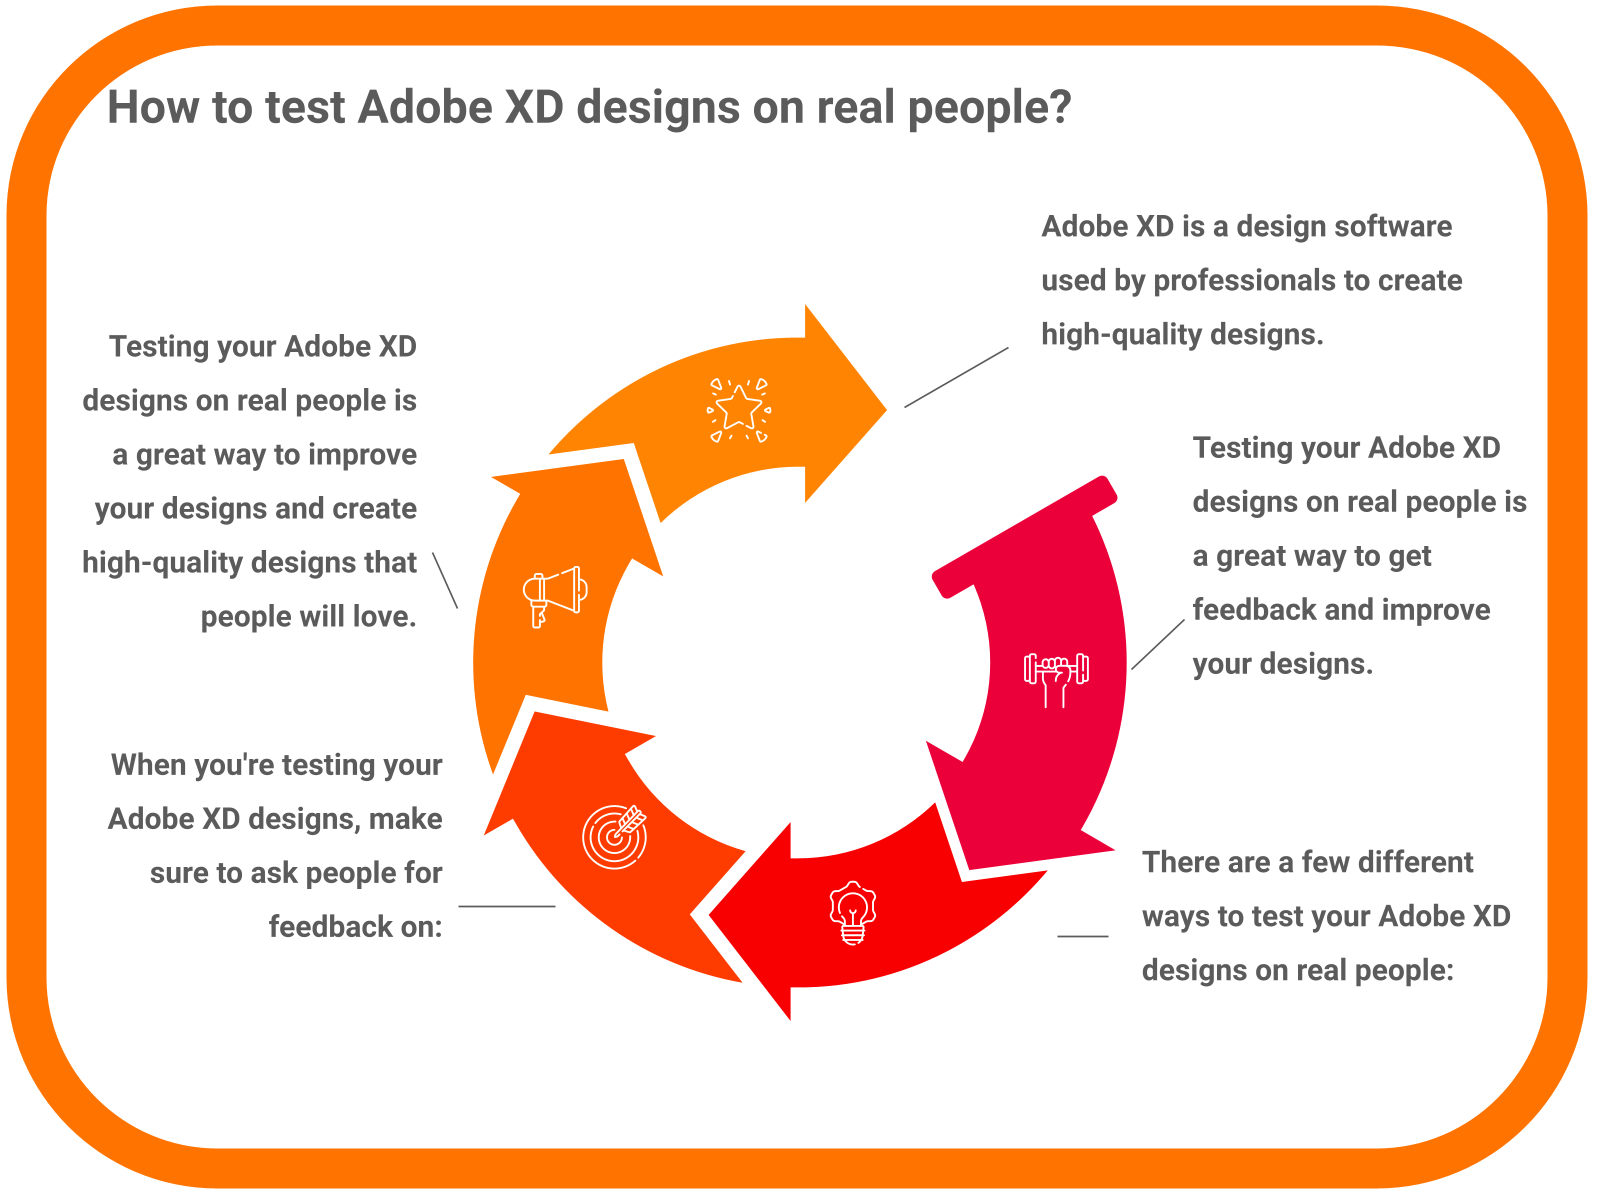 How to test Adobe XD designs on real people?